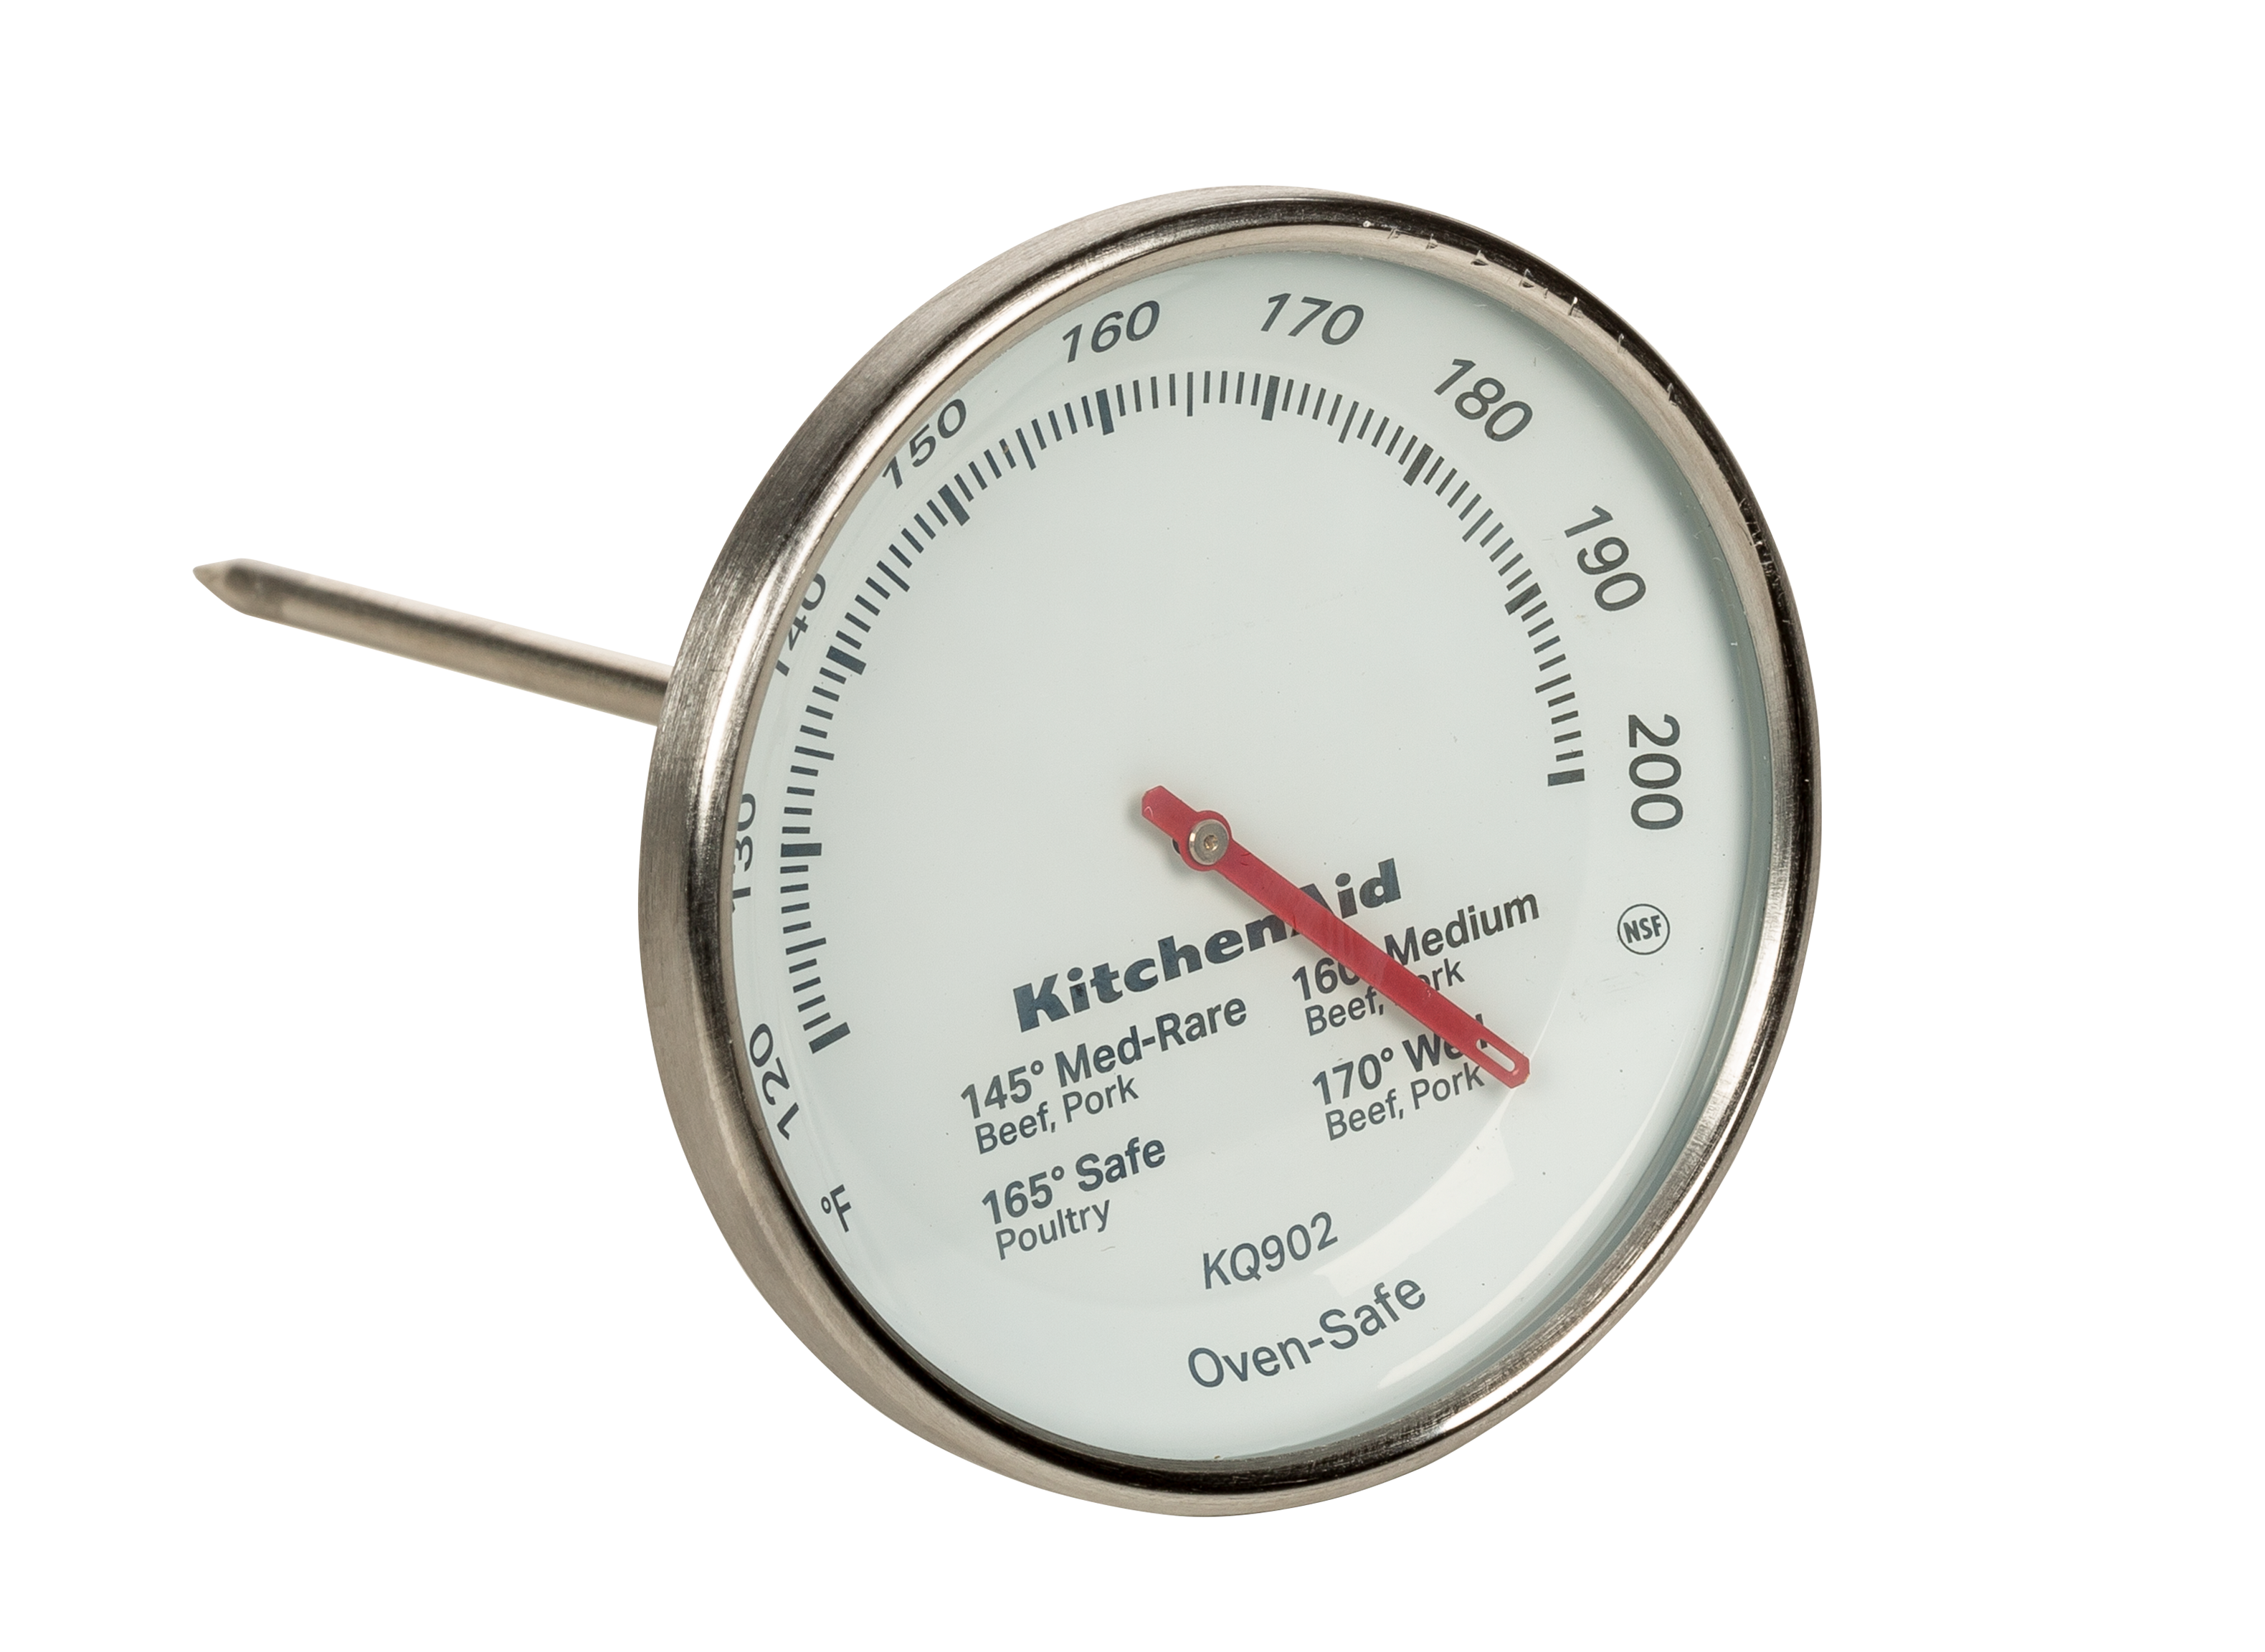 https://crdms.images.consumerreports.org/prod/products/cr/models/407257-leave-in-analog-kitchenaid-leave-in-meat-analog-thermometer-kq902-10031412.png